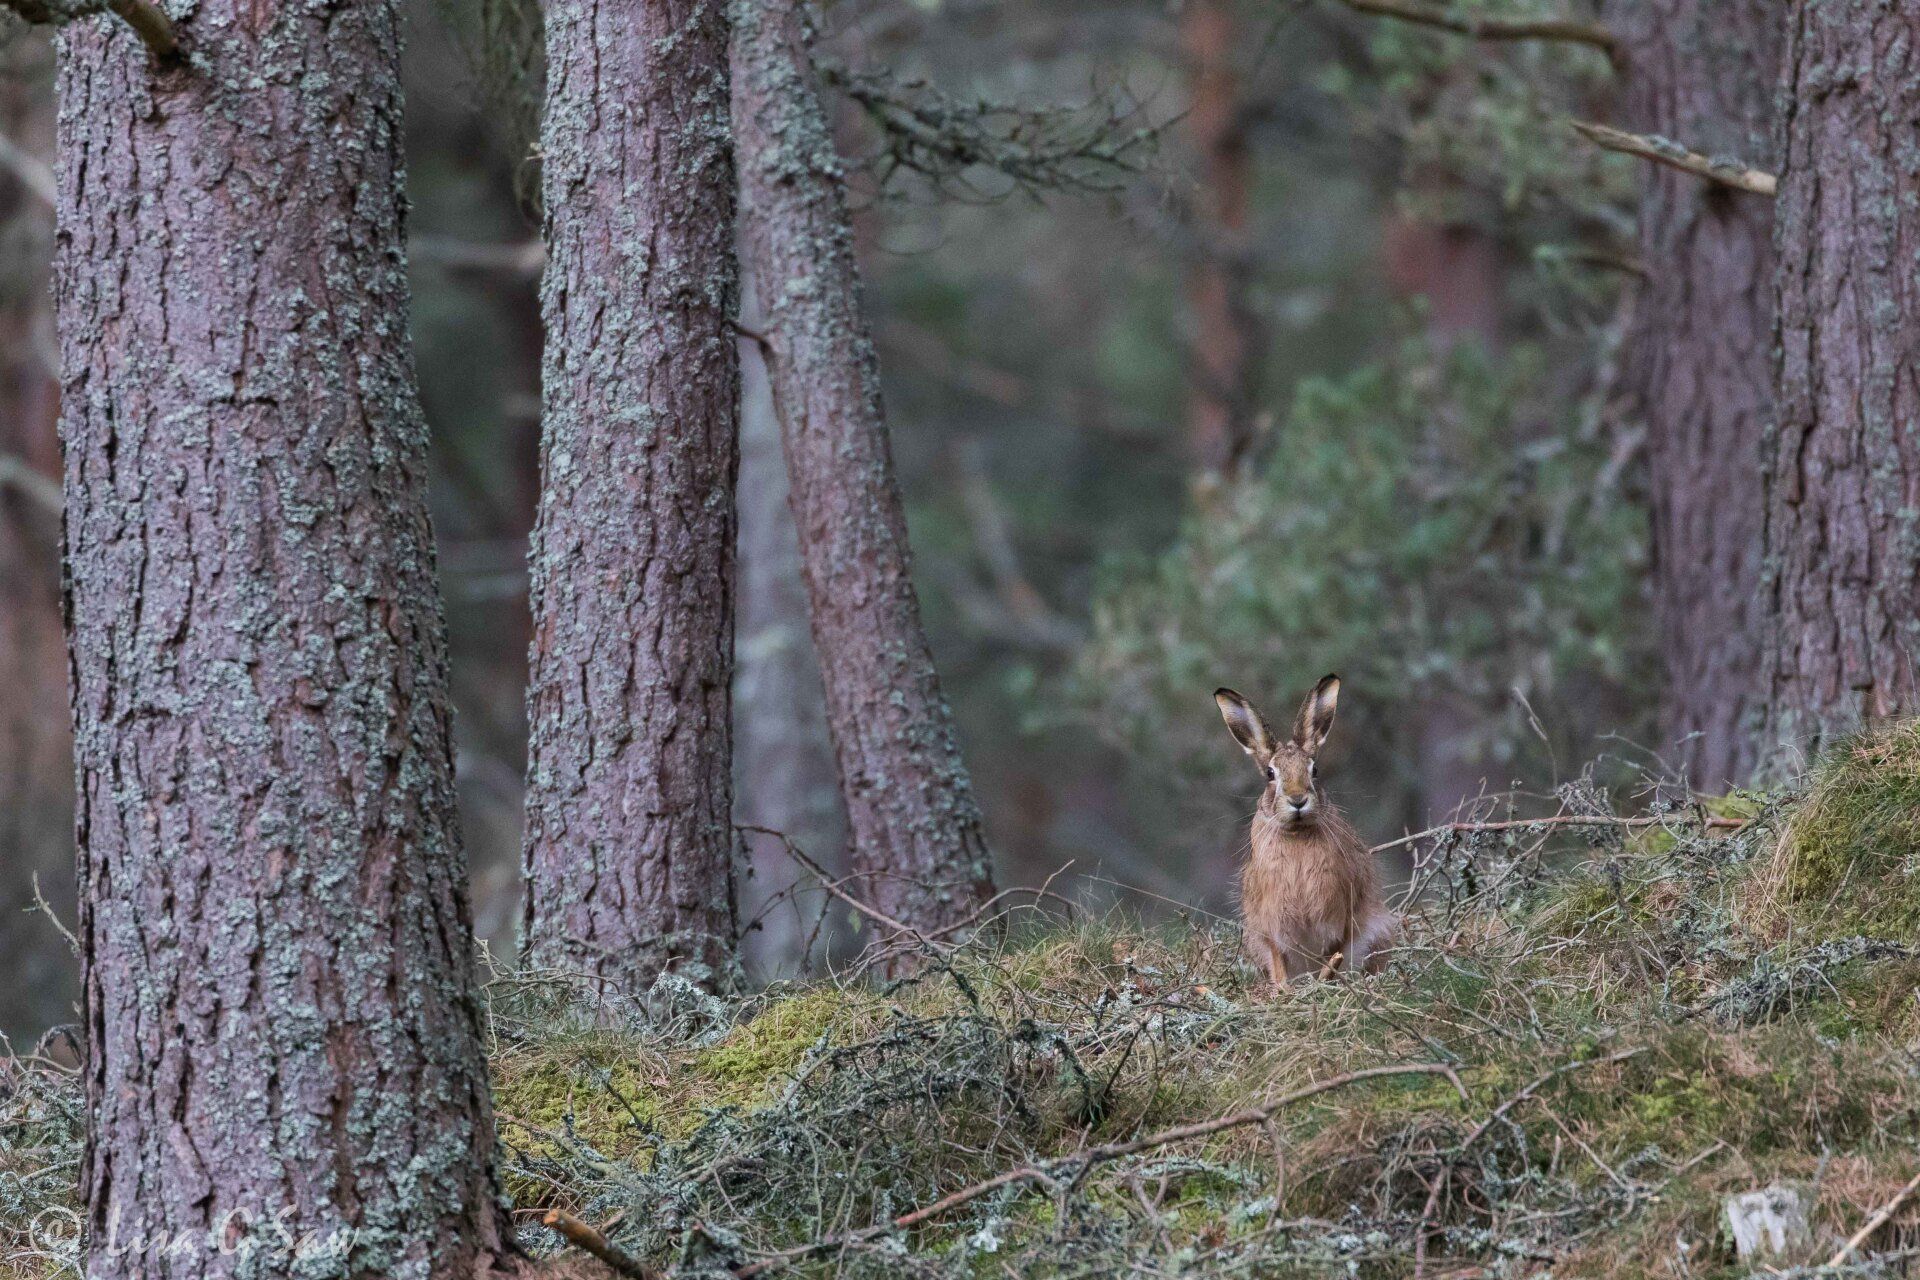 Brown hare in a pine forest in Scotland